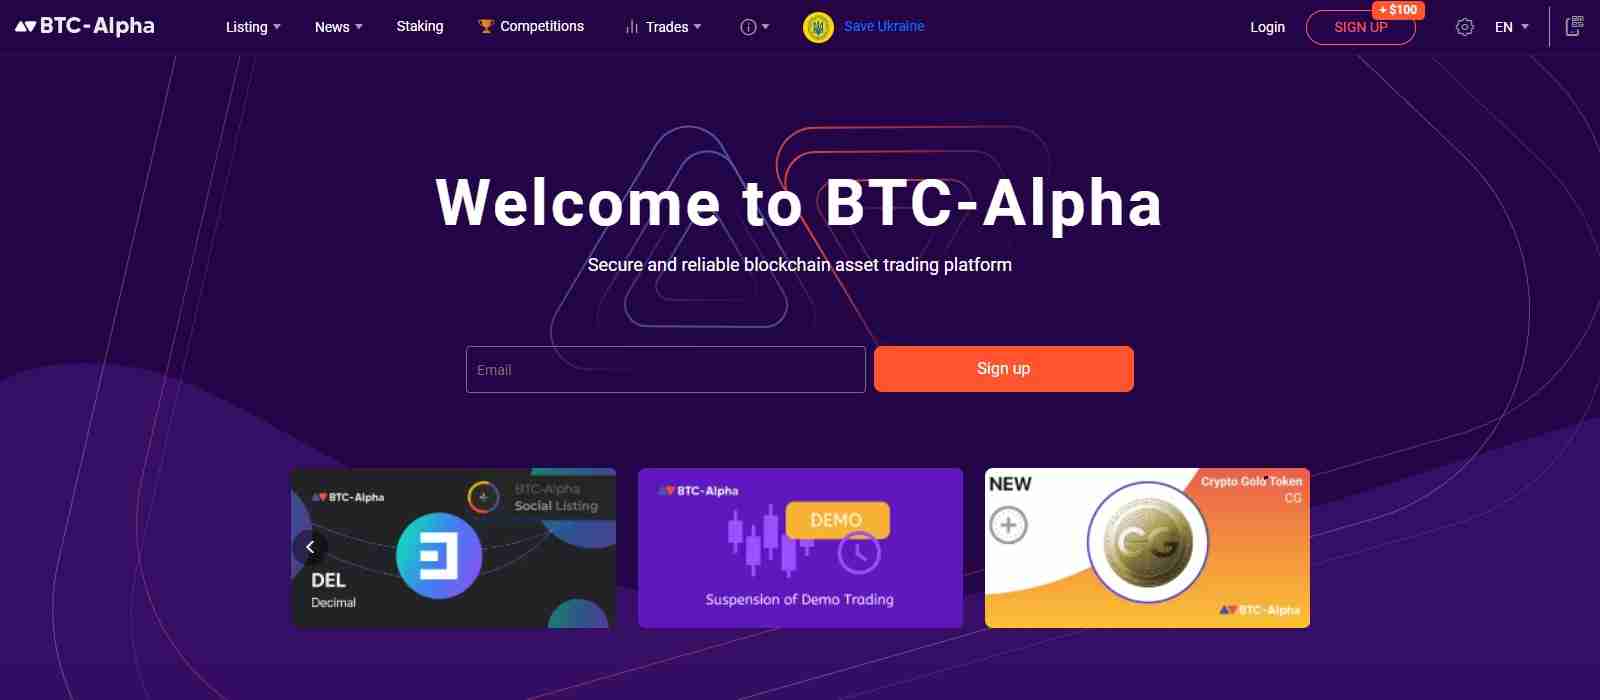 Btc-alpha.com Crypto Exchange Review: It Is Good Or Bad?